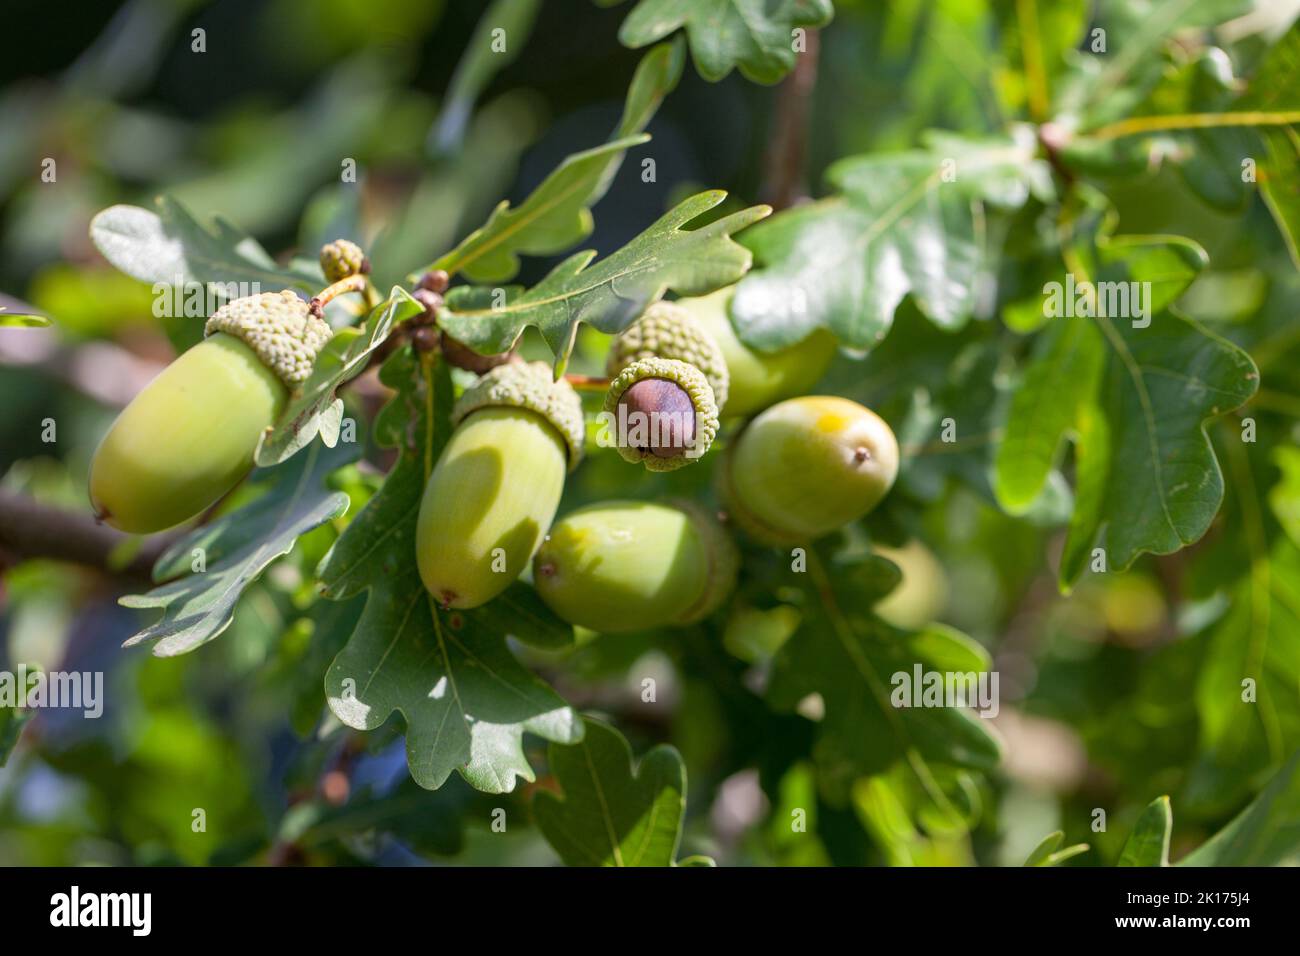 Autumn Season Approaches - Close-up of ripening acorn nuts growing on a tree in the forest Stock Photo